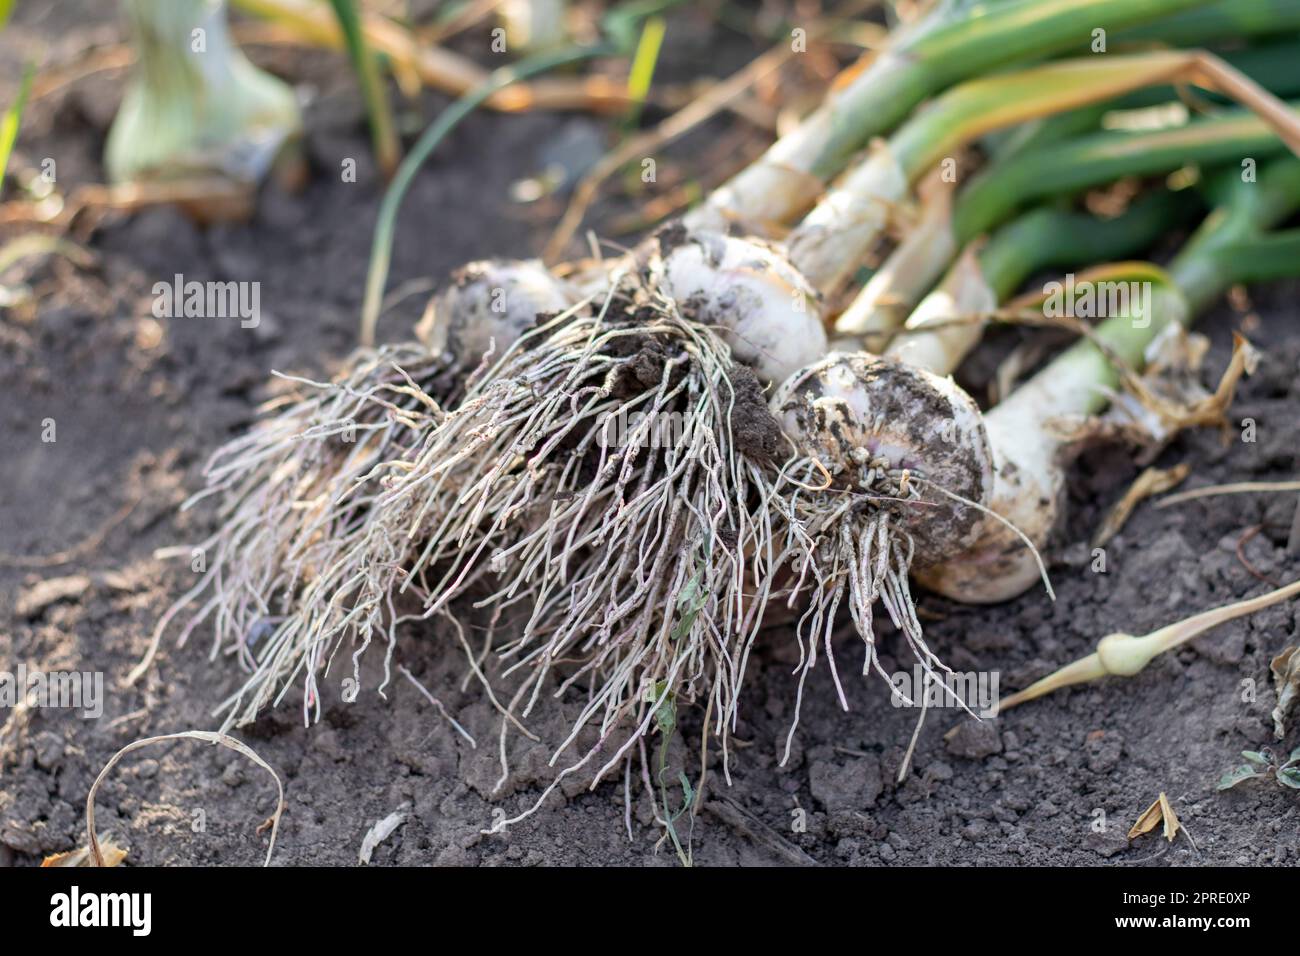 Young garlic with roots lying on garden soil. Collection of Lyubasha garlic in the garden. Agricultural field of garlic plant. Freshly picked vegetables, organic farming concept. Organic garlic. Stock Photo